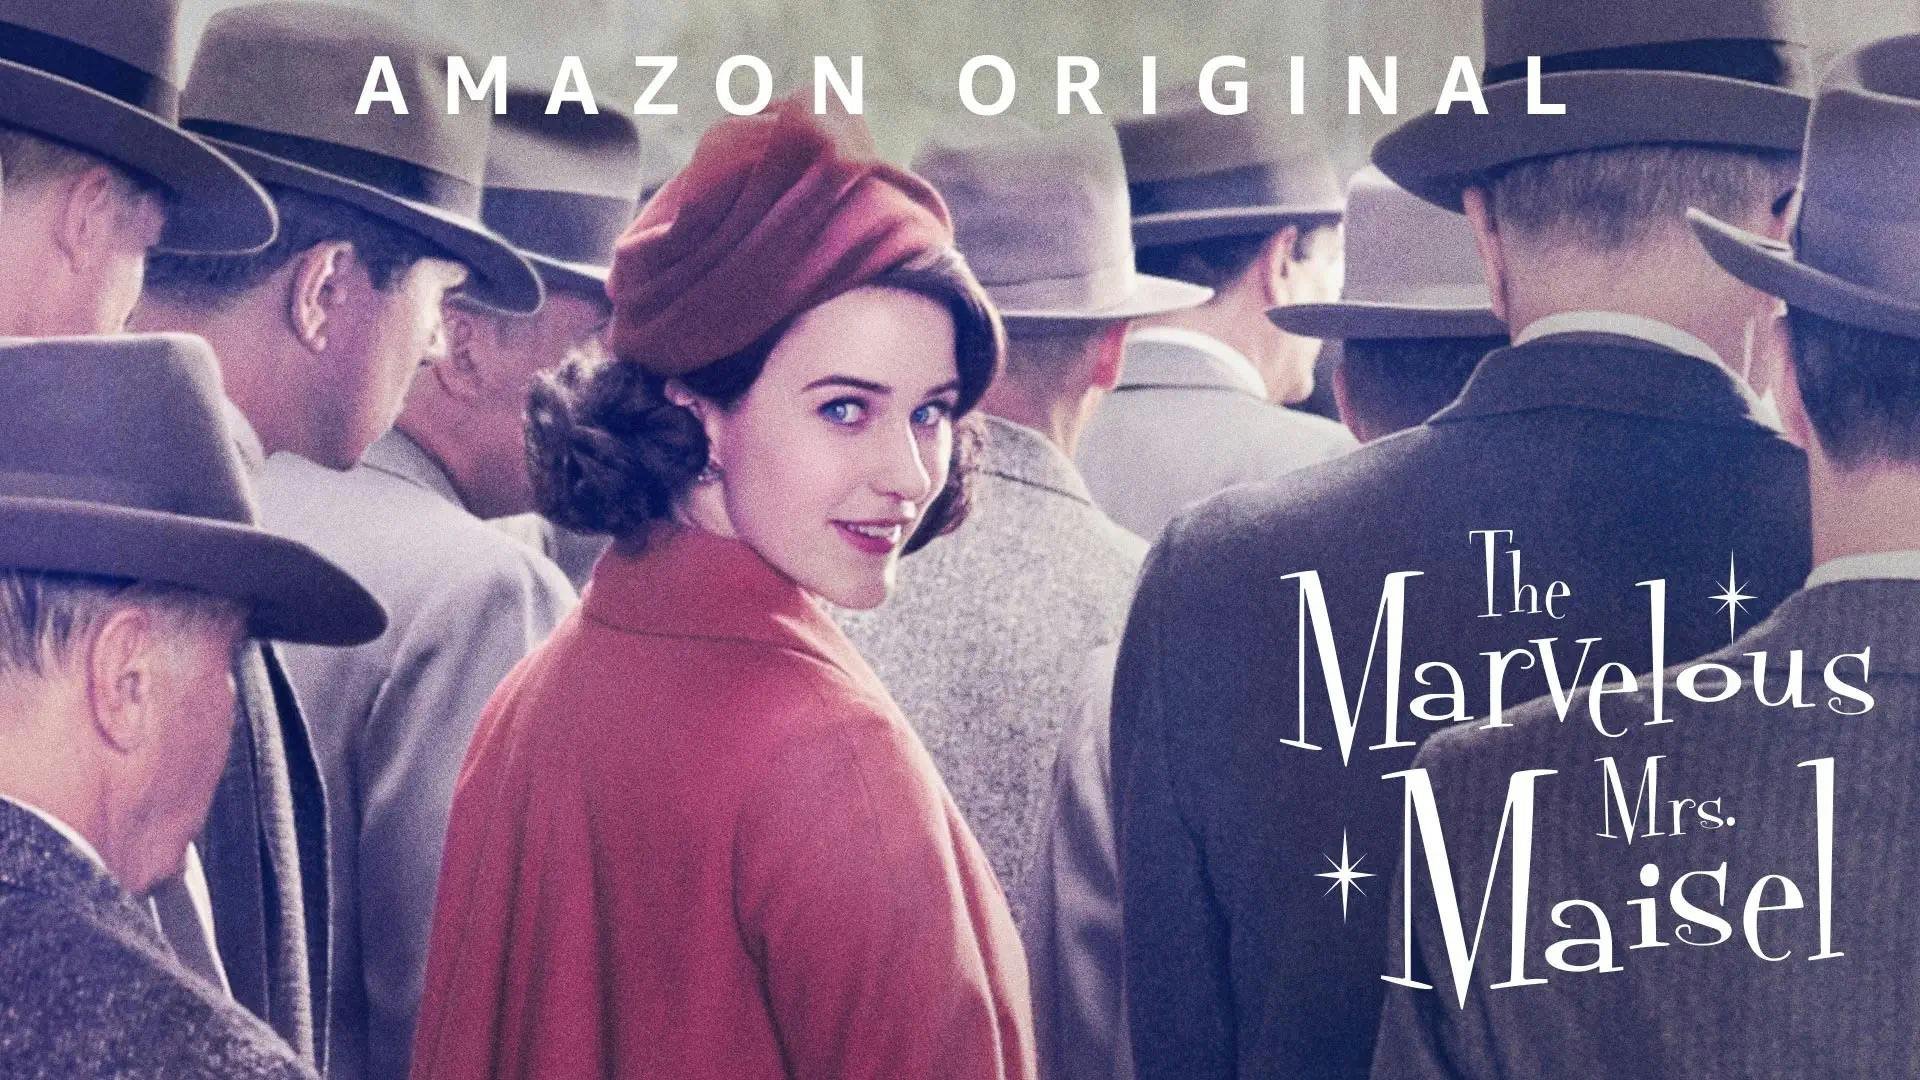 The thumbnail cover for the tv show The Marvelous Mrs. Maisel